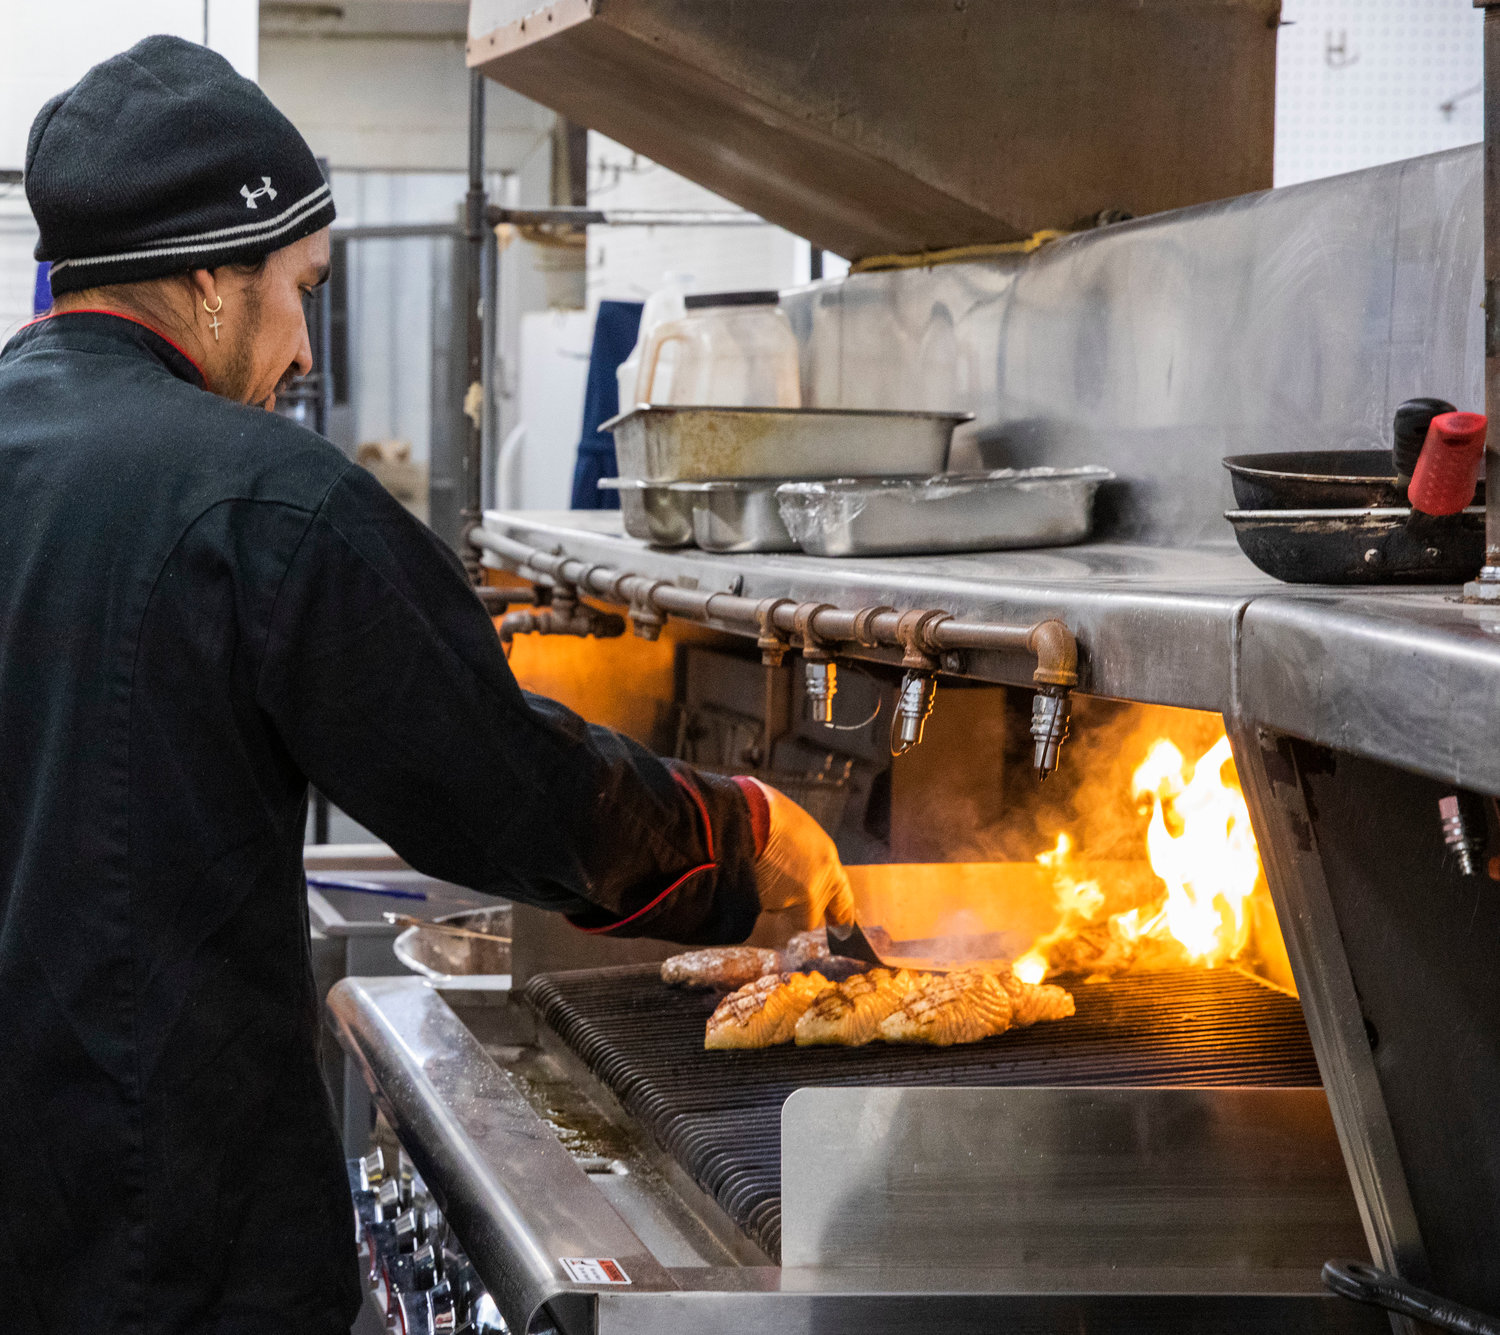 Flames rise from the grill as Owner and Head Chef Eyner Cardona checks burgers and salmon at Ocean Prime Family Restaurant in Chehalis Monday morning.